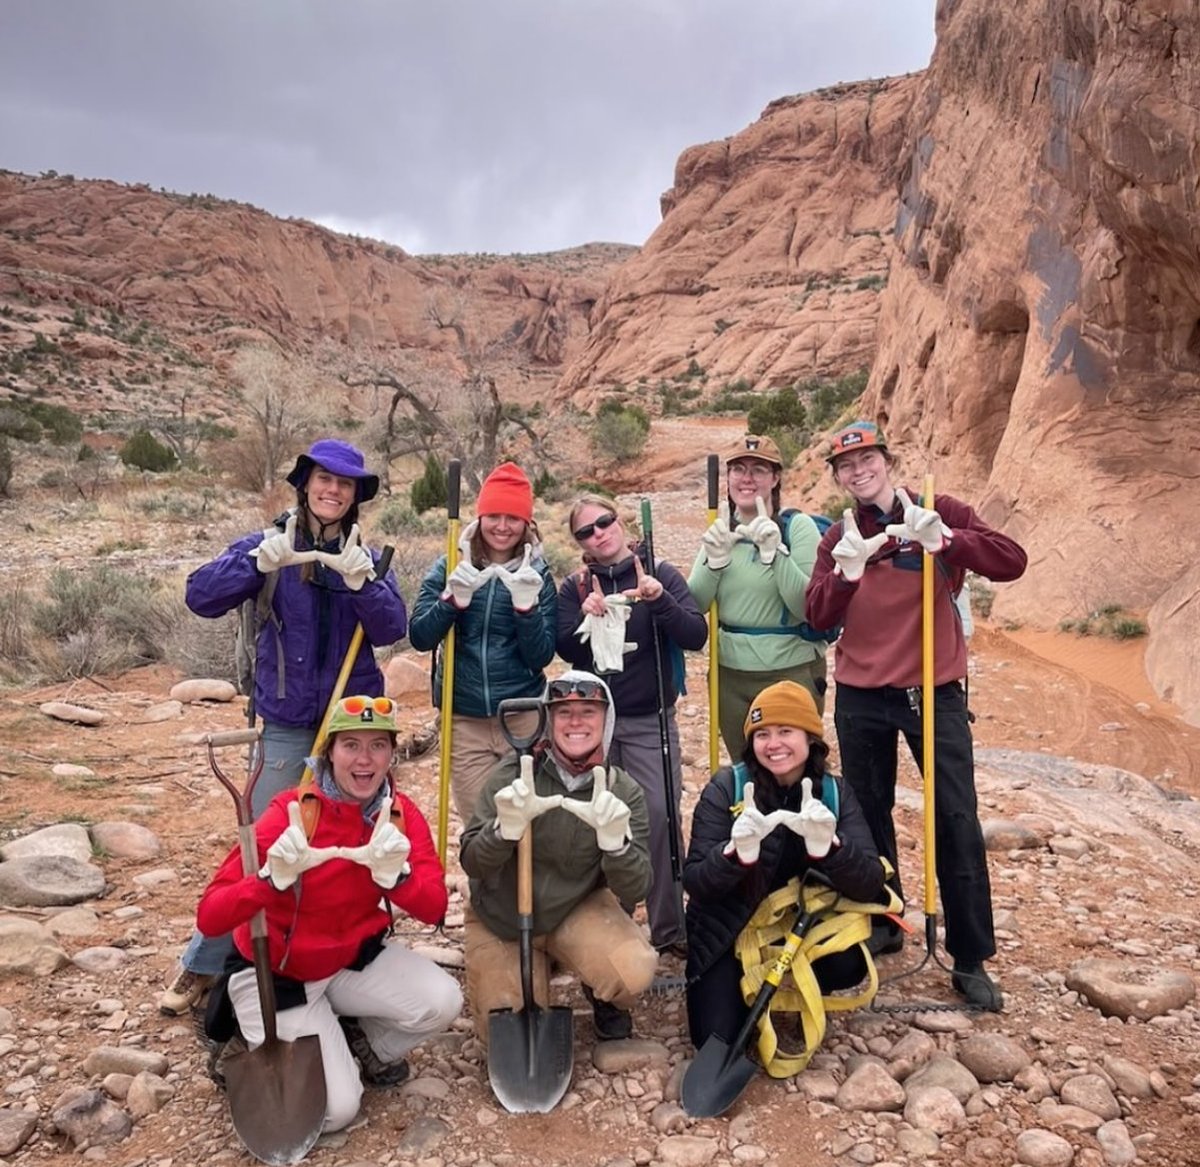 #FlashTheUFriday from Grand County! Thanks to the #UofU Backcountry Squatters student club for reppin’ the U during @protectwildutah’s conservation weekend, where they helped heal southeastern Utah’s beautiful landscapes. 🏜️#GoUtes